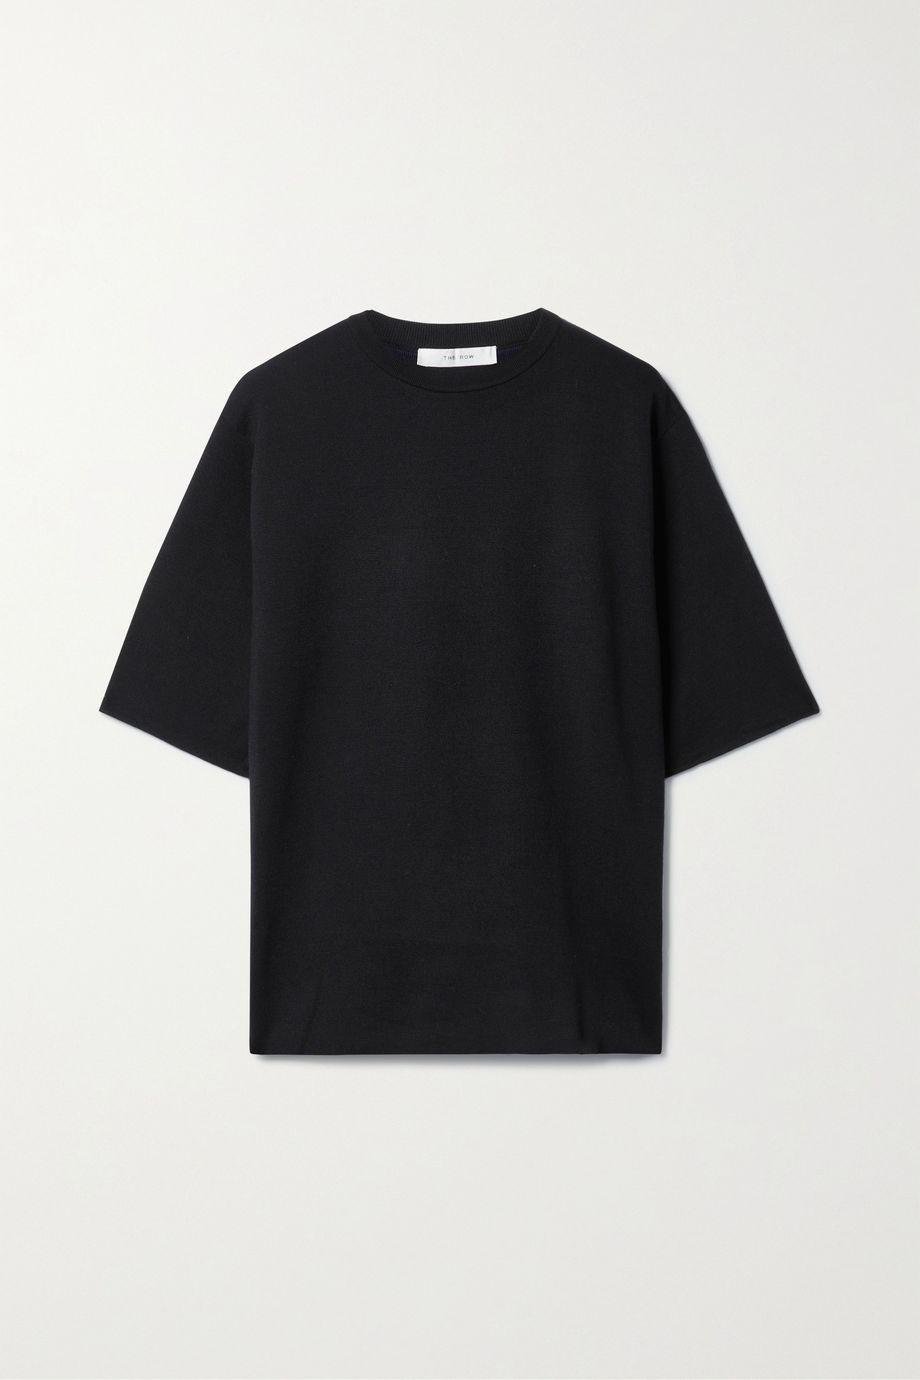 Silas knitted T-shirt by THE ROW